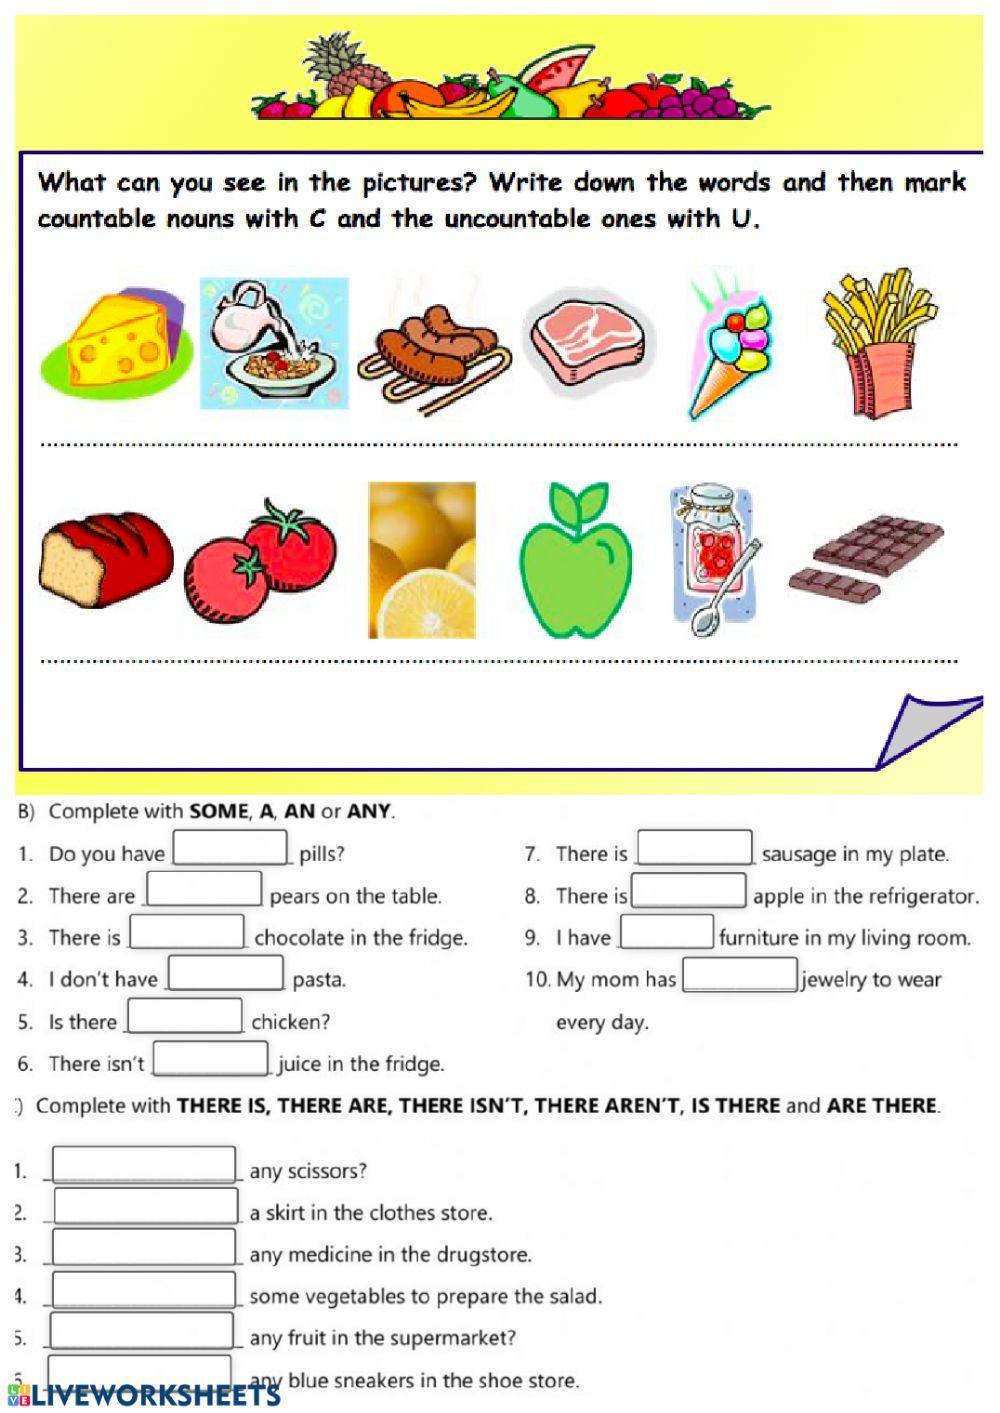 There is - there are - some - an - any worksheet | Live Worksheets